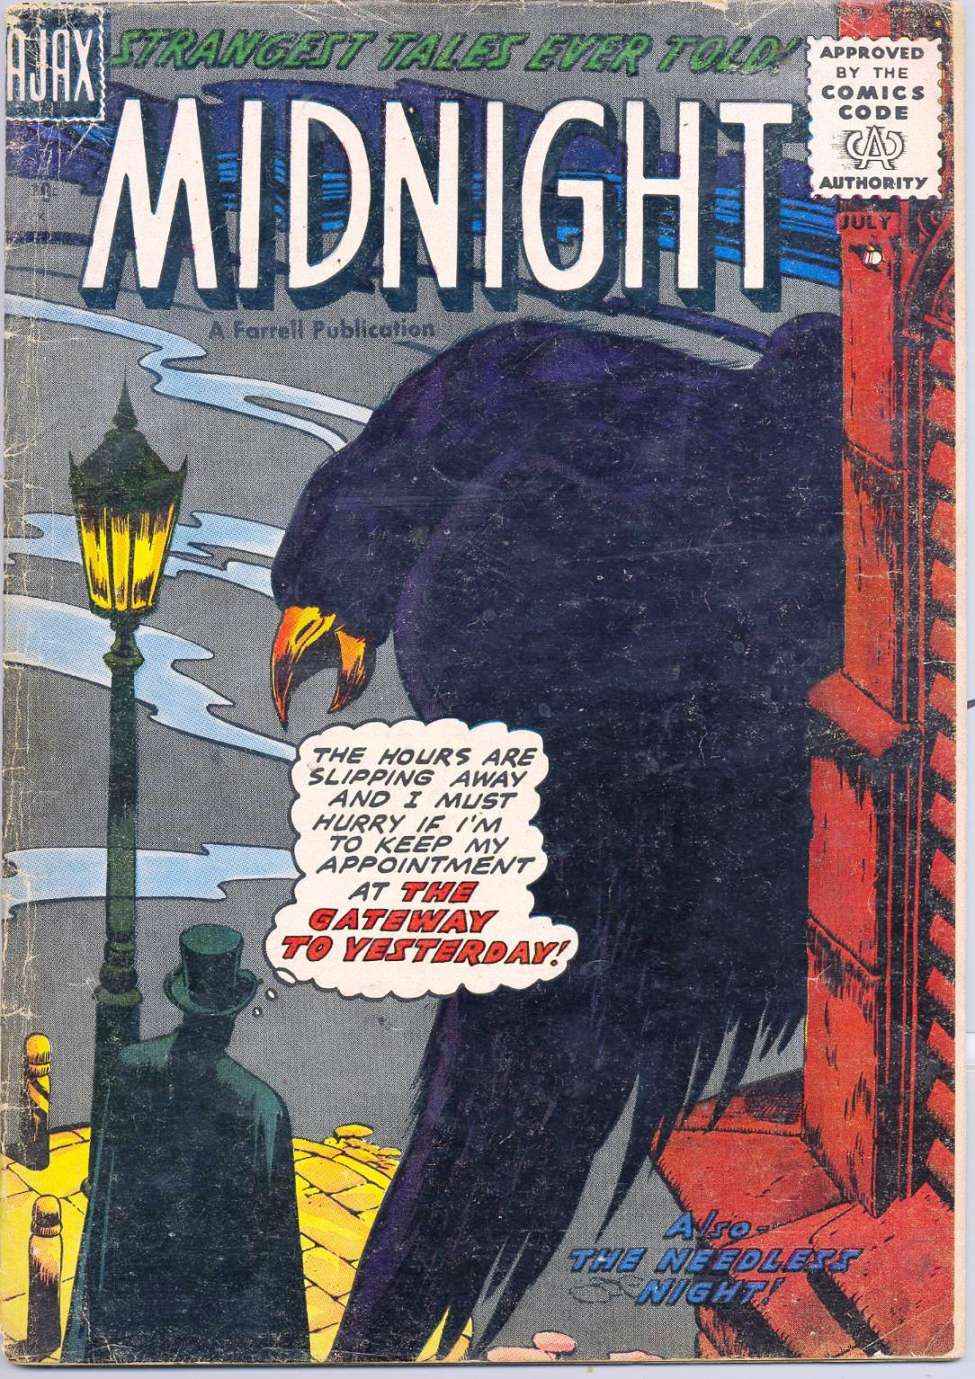 Book Cover For Midnight 2